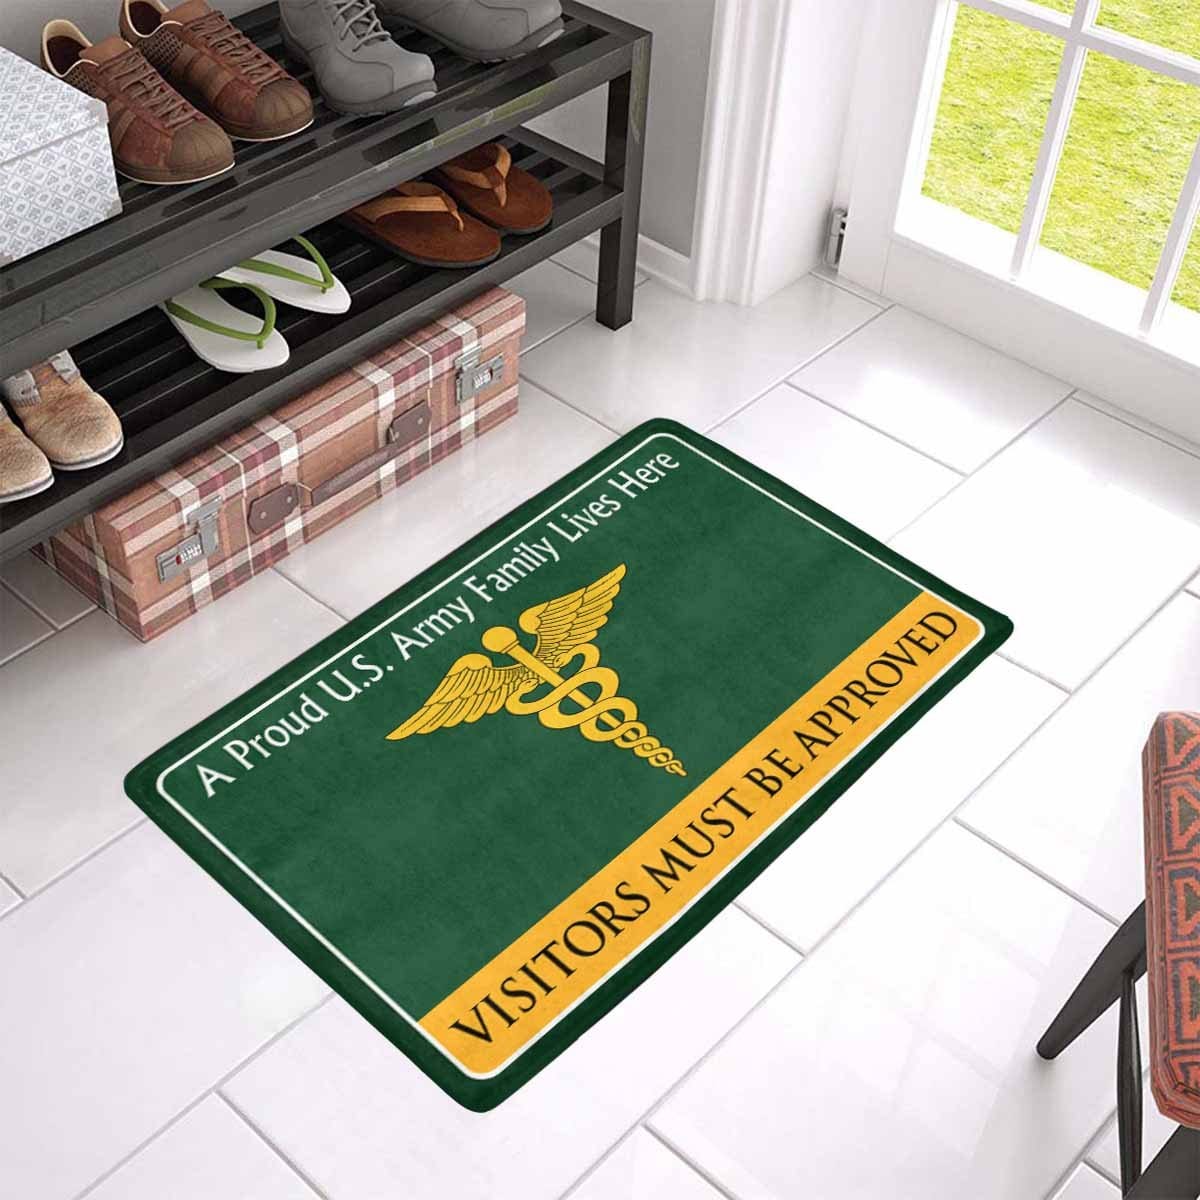 US Army Medical Corps Family Doormat - Visitors must be approved Doormat (23.6 inches x 15.7 inches)-Doormat-Army-Branch-Veterans Nation